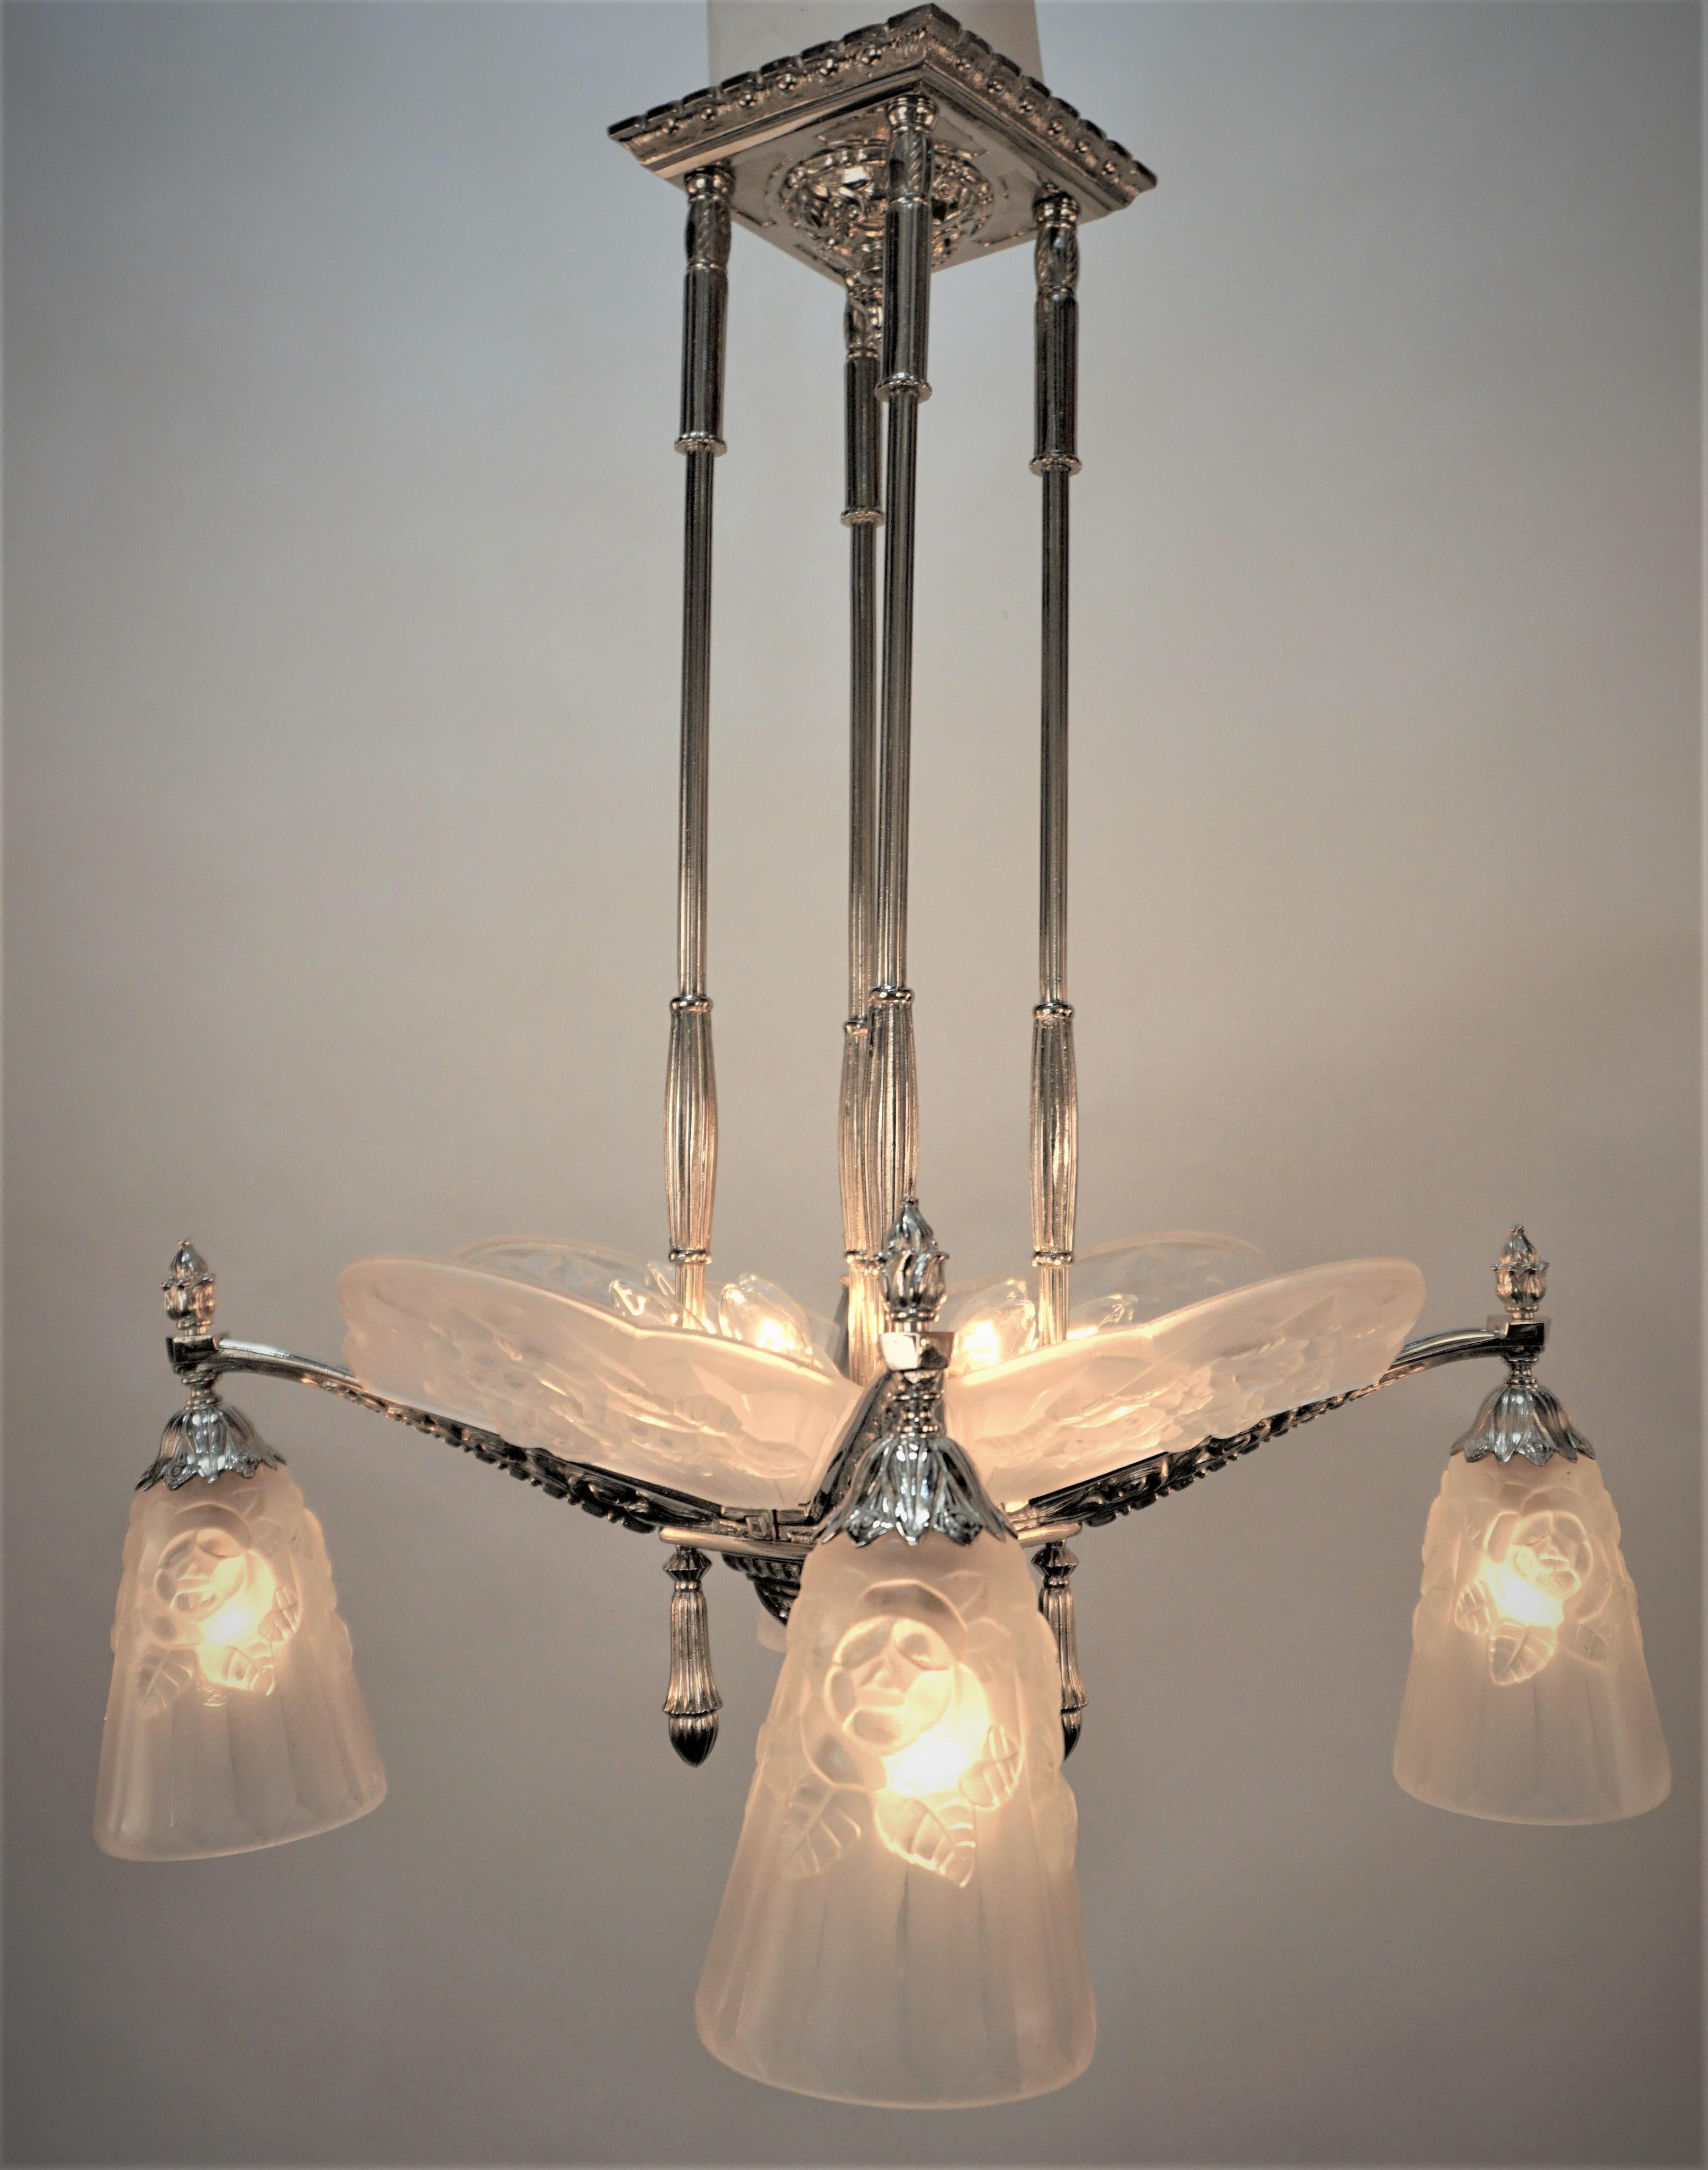 Elegant clear frost glass with nickel on bronze frame Art deco chandelier.
twelve lights 60watts max each. 
Professionally rewired and ready for installation.
Measurement: width 18.5